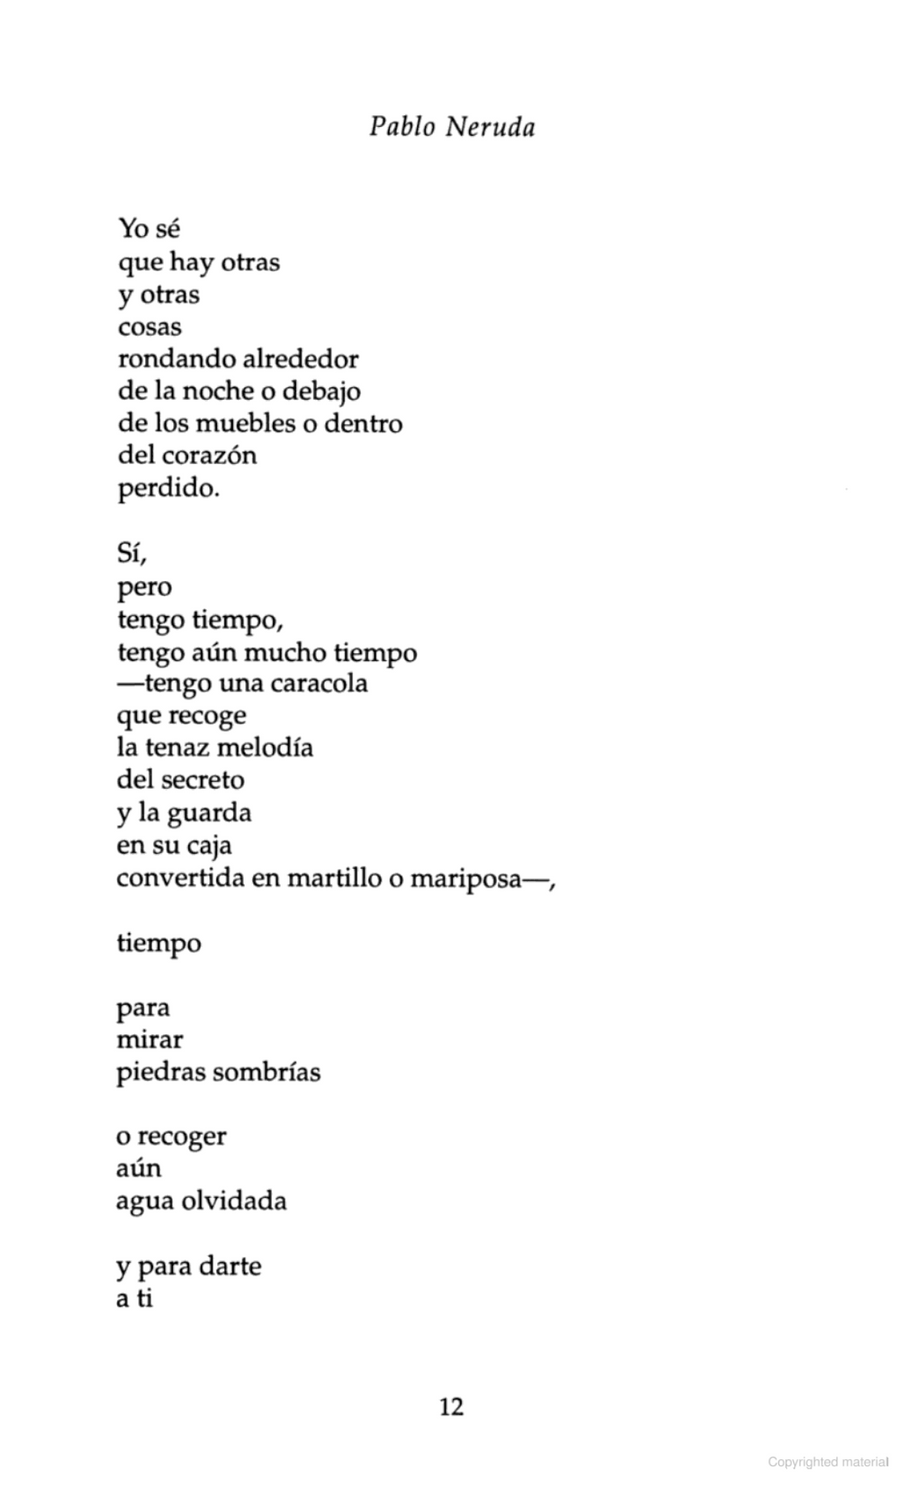 Fifty Odes by Pablo Neruda